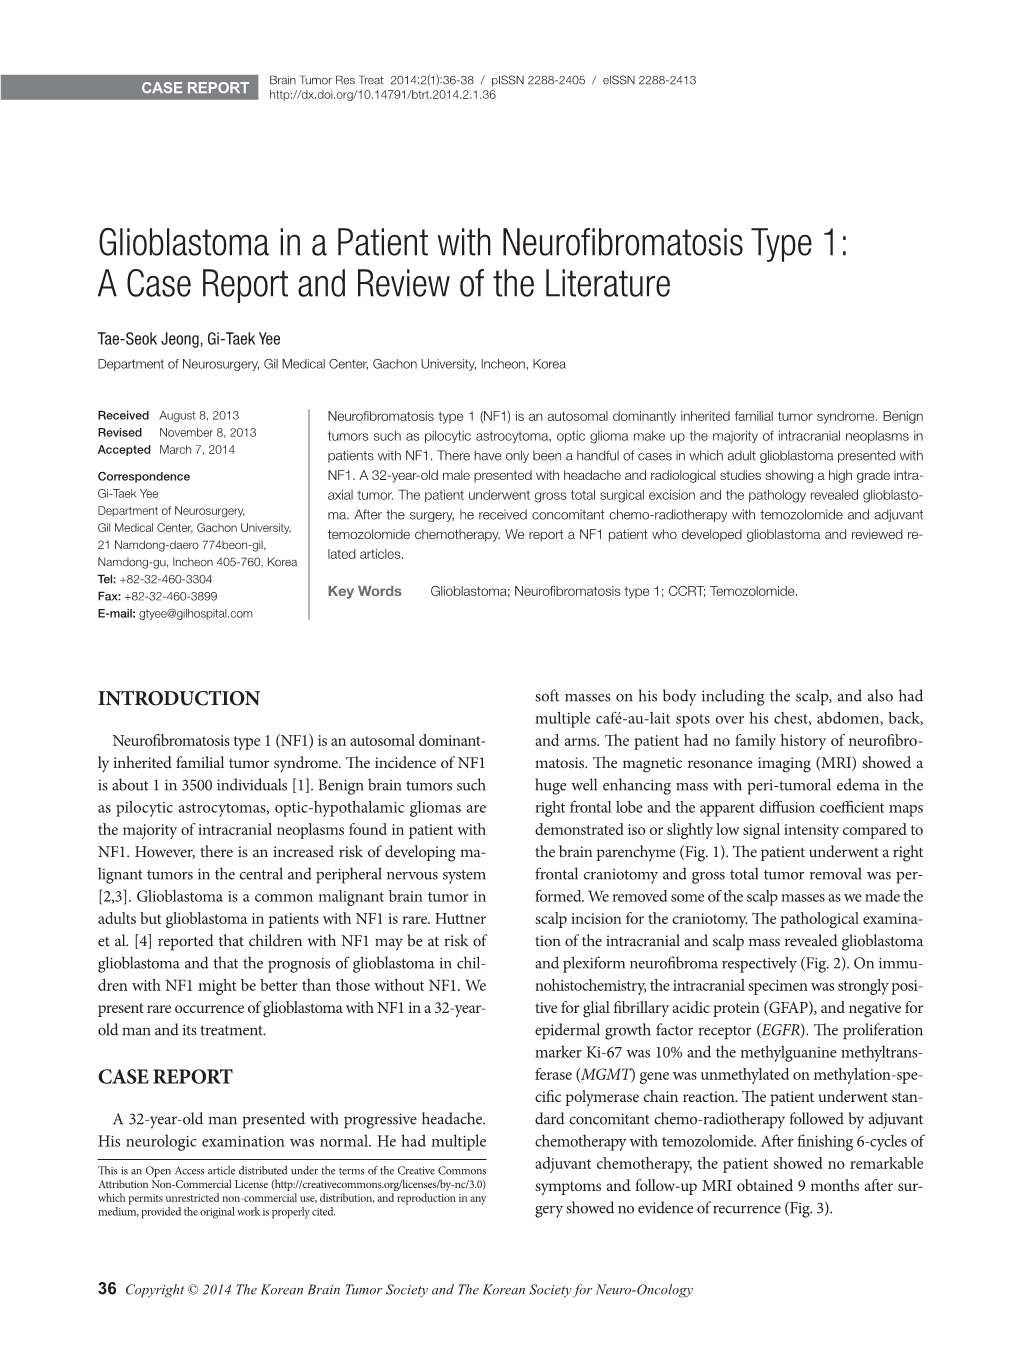 Glioblastoma in a Patient with Neurofibromatosis Type 1: a Case Report and Review of the Literature